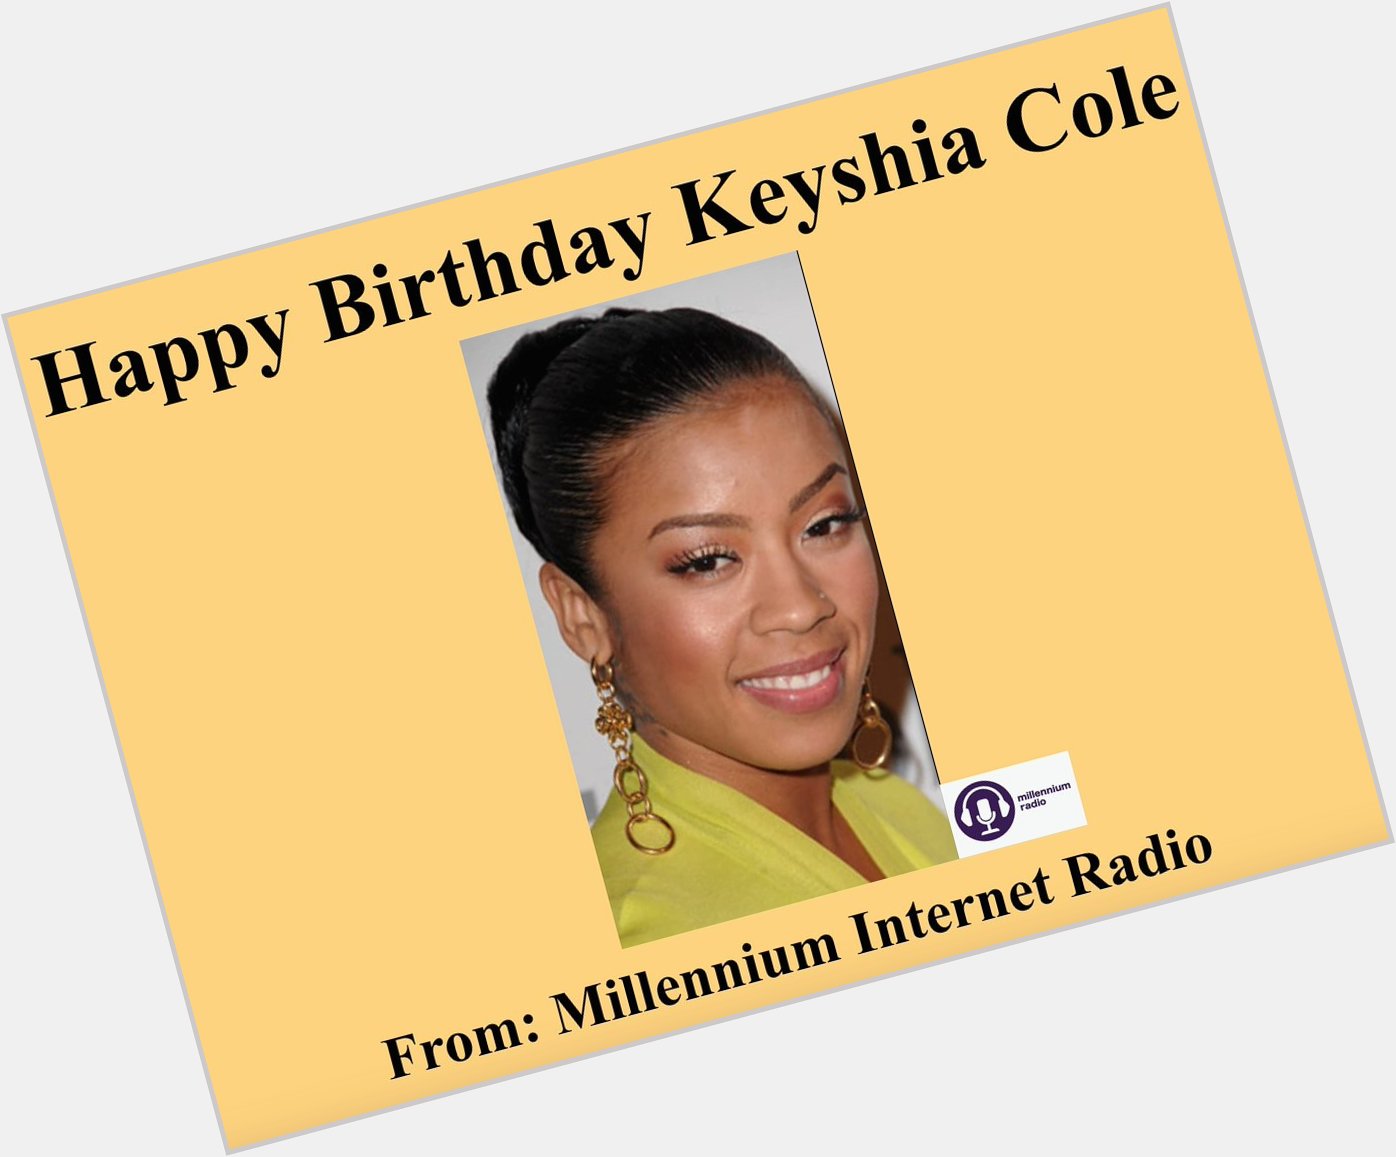 Happy Birthday to singer, songwriter, actress, and television producer Keyshia Cole! 